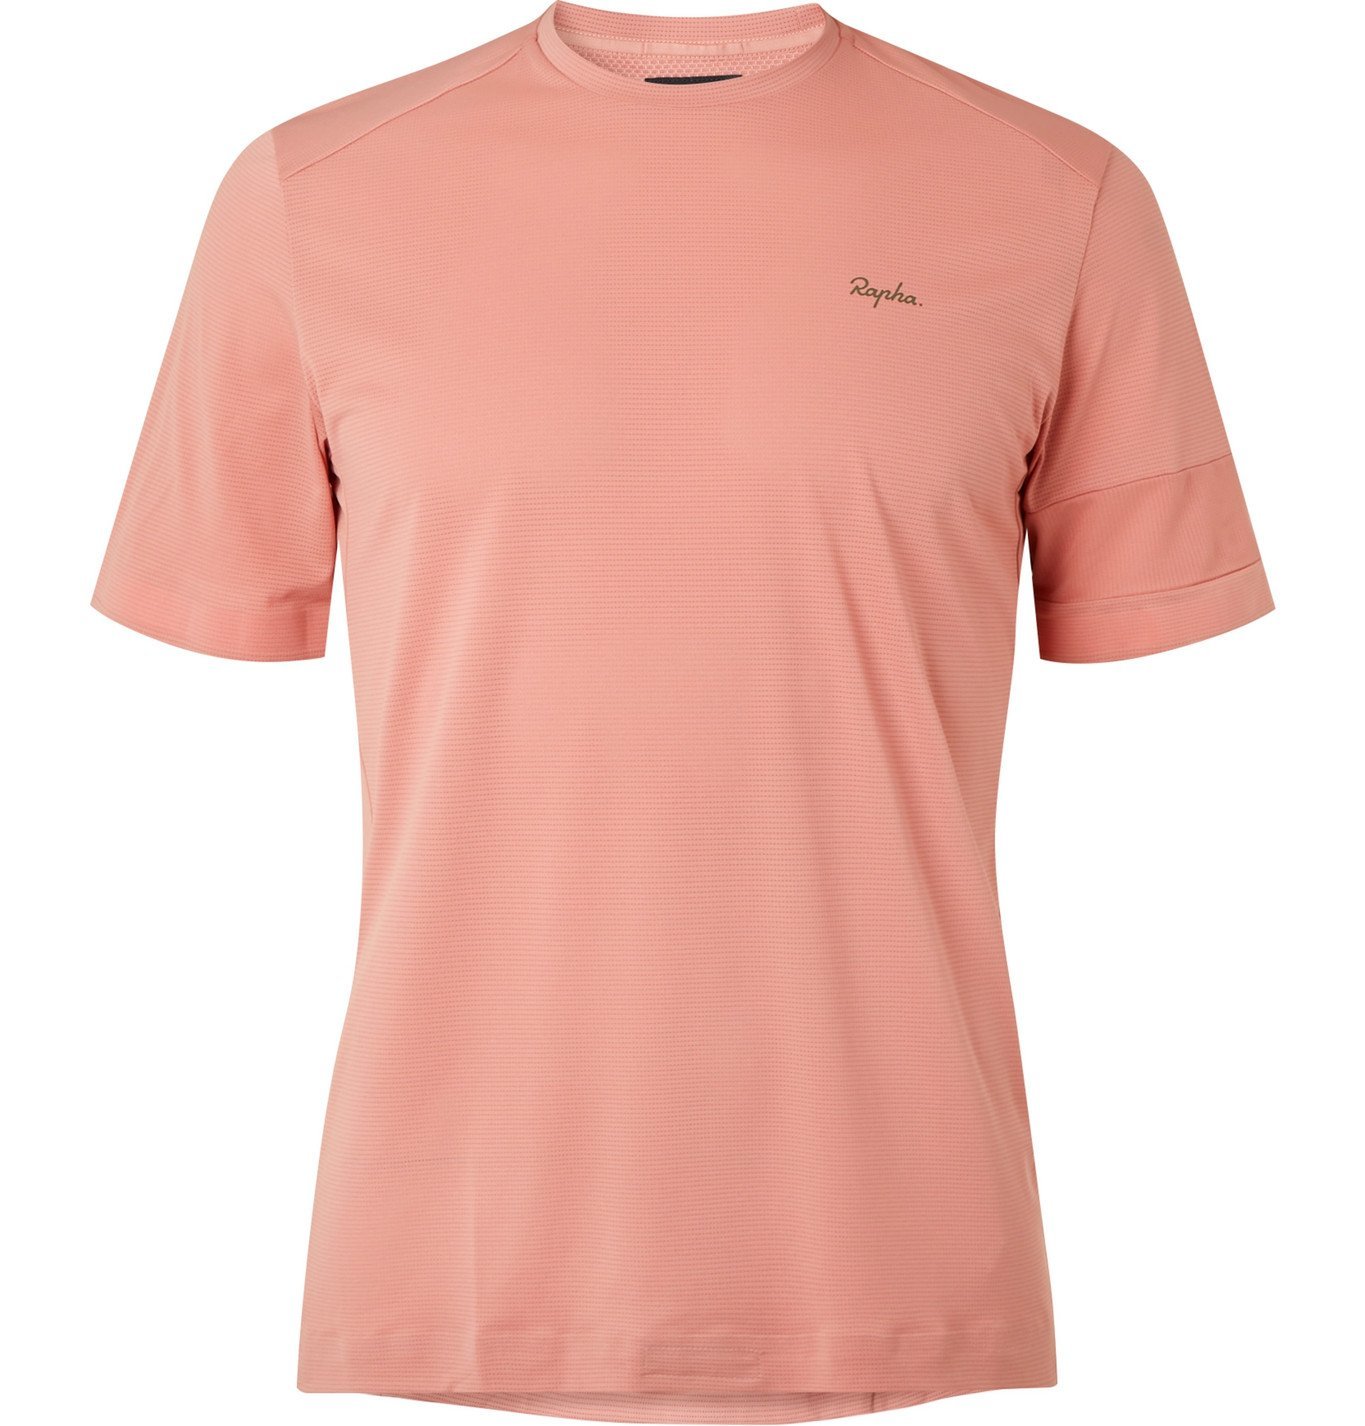 Rapha Men's Technical T-Shirt High-Vis Pink Size X Large Brand New With Tag 